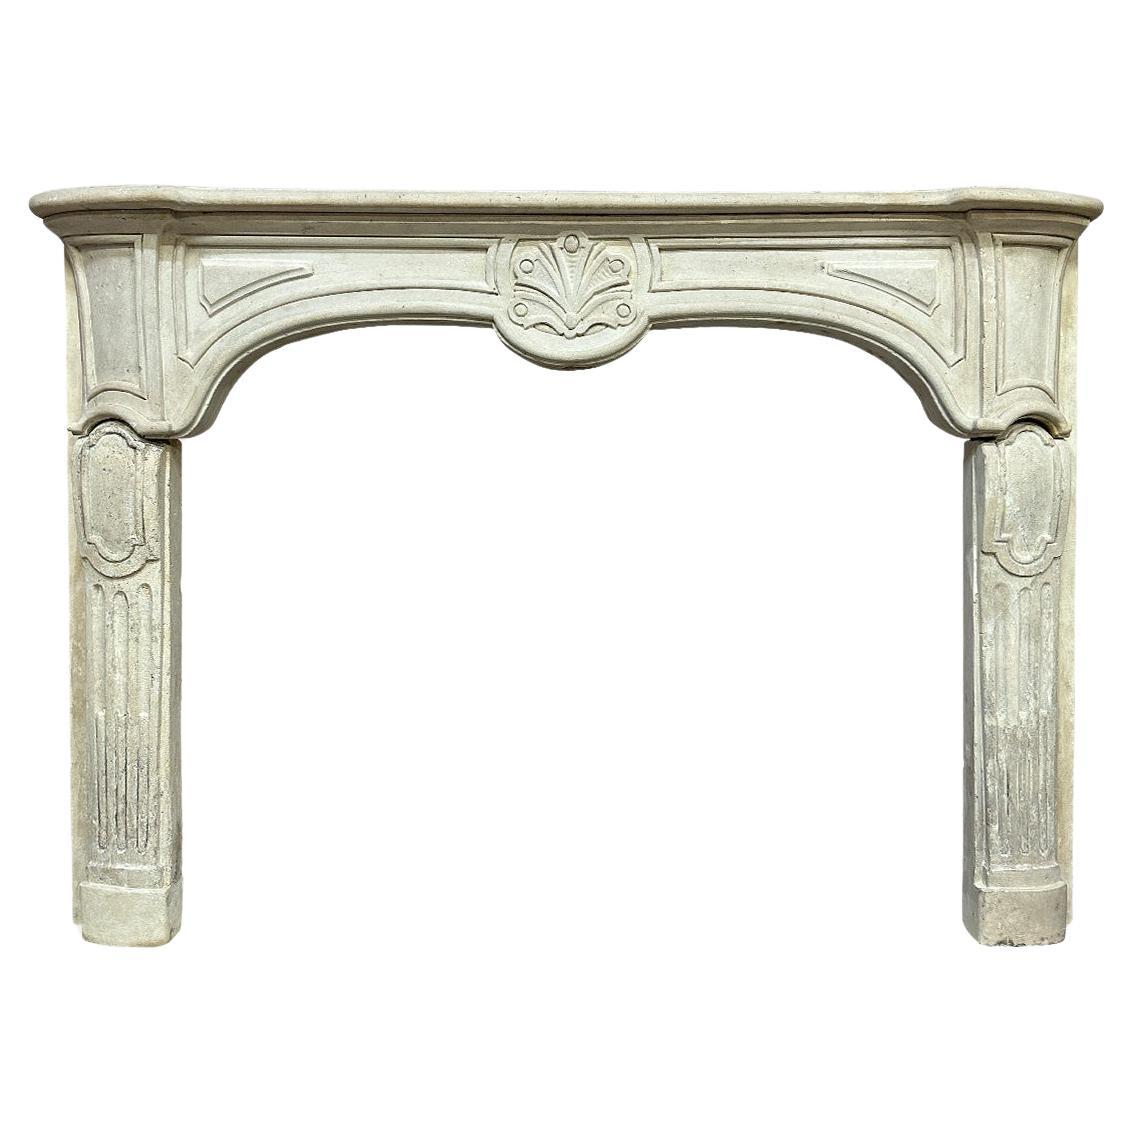 An Antique 18th century Provincial French Stone Fireplace Mantel 